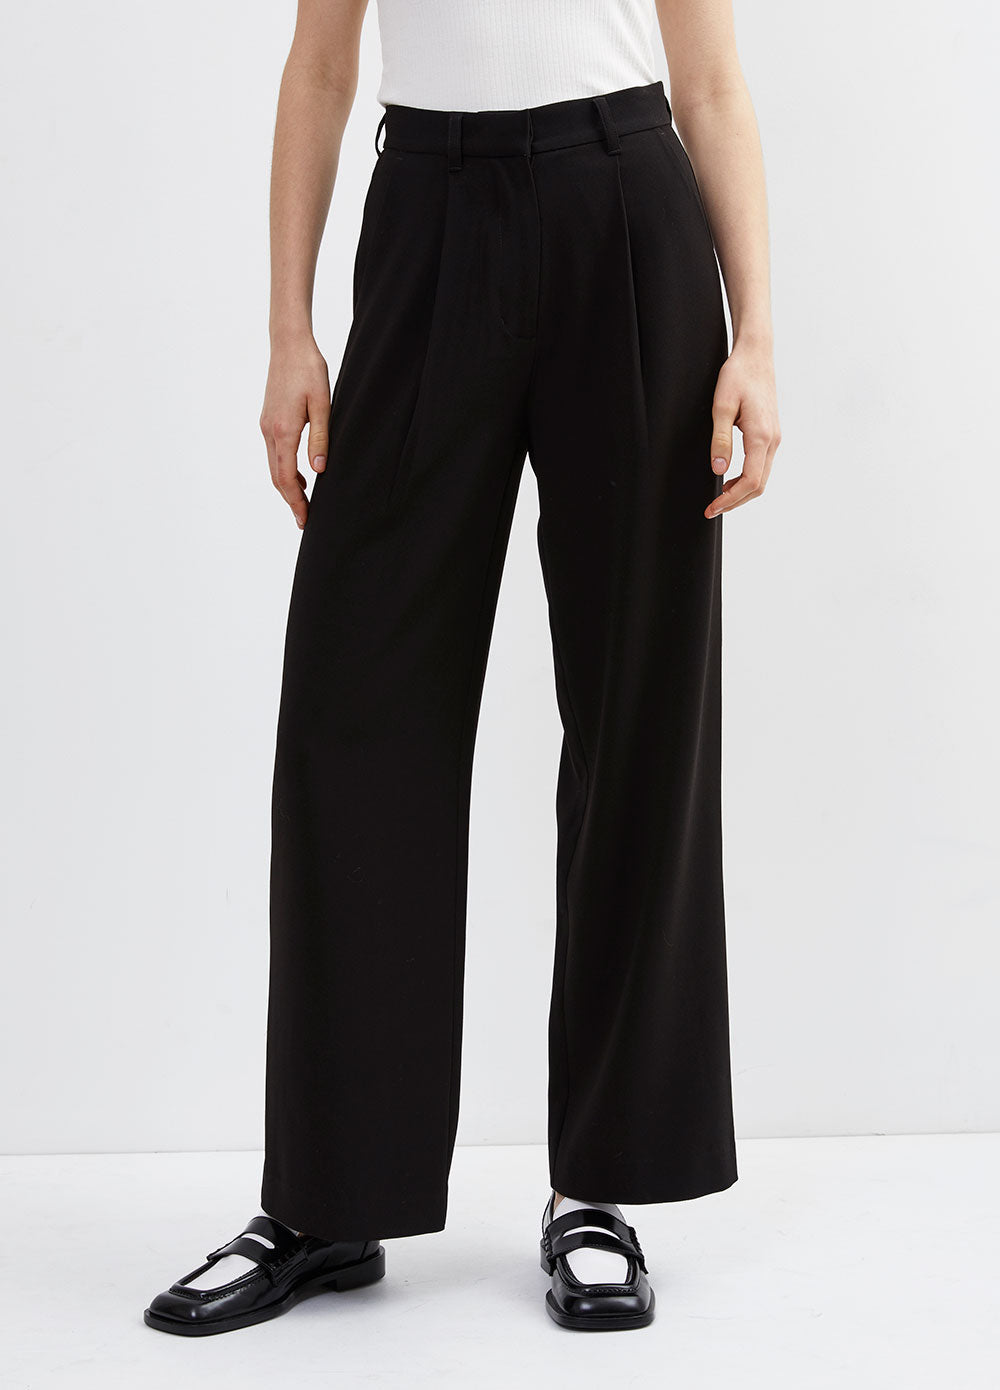 Women's Beau Pants by Incu Collection | Incu